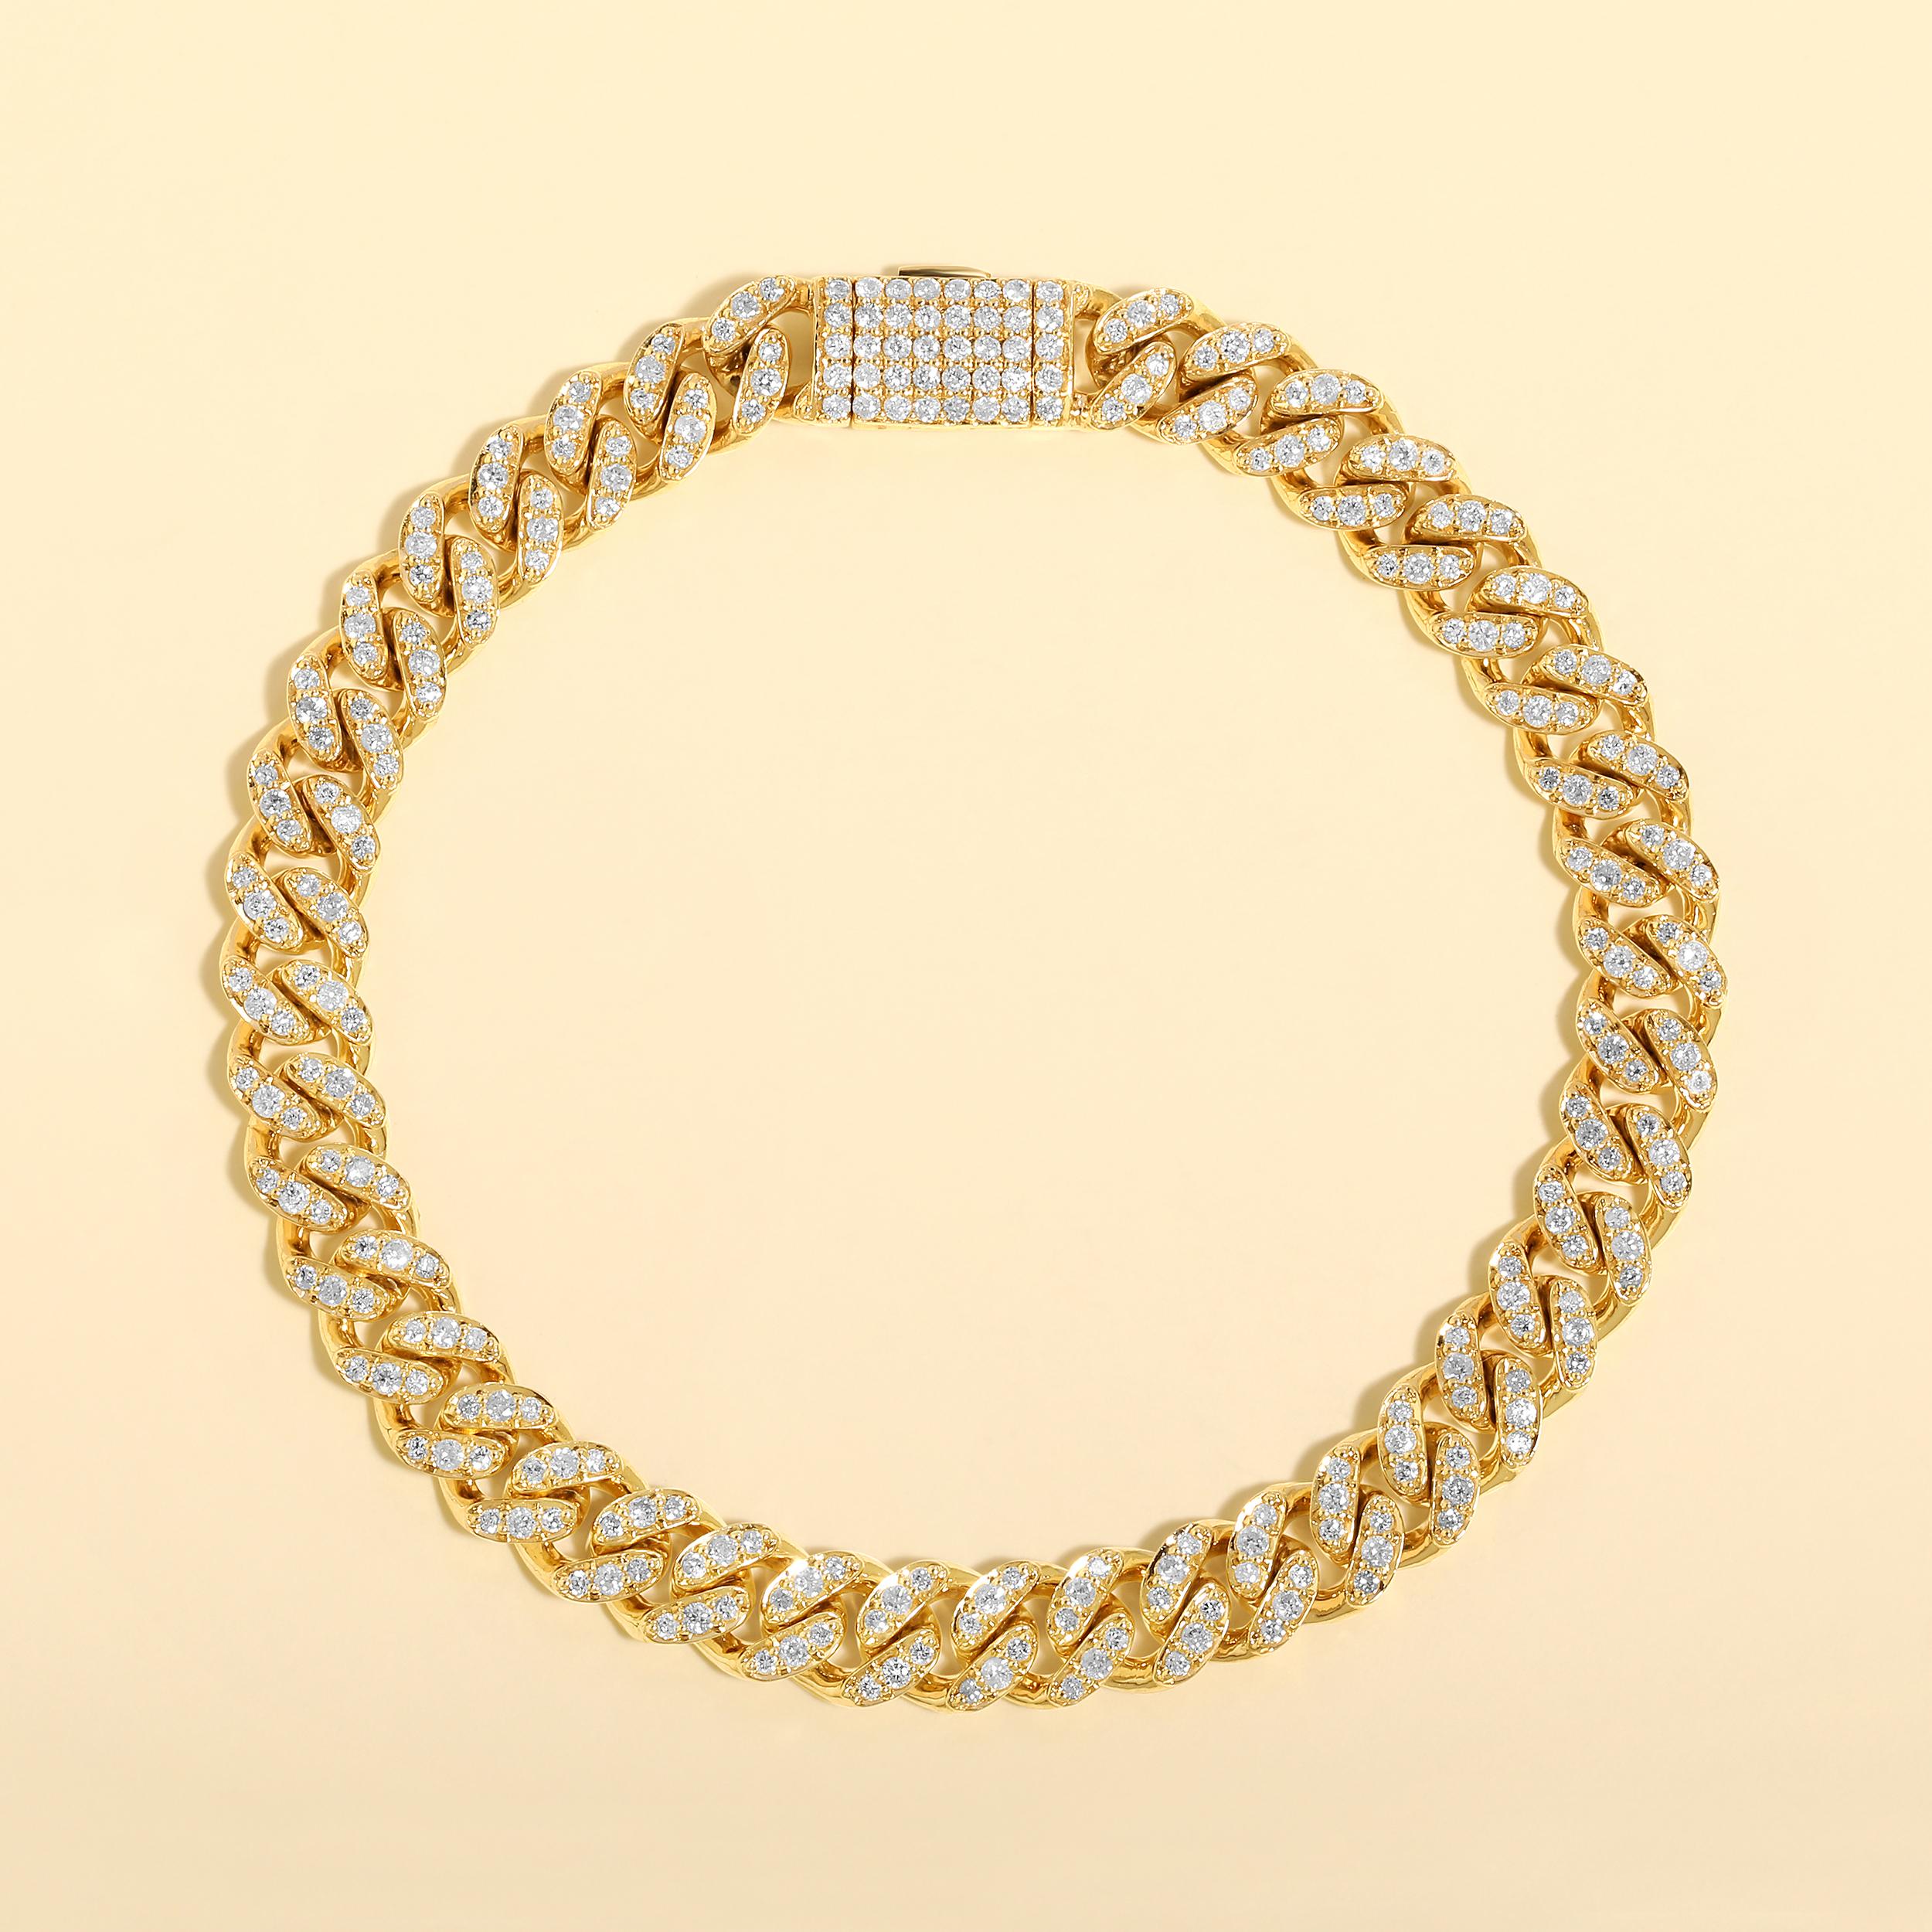 Crafted in 17.99 grams of 10K Yellow Gold, the bracelet contains 286 stones of Round Natural Diamonds with a total of 2.34 carat in F-G color and I1-I2 clarity. The bracelet length is 7.5 inches.

CONTEMPORARY AND TIMELESS ESSENCE: Crafted in